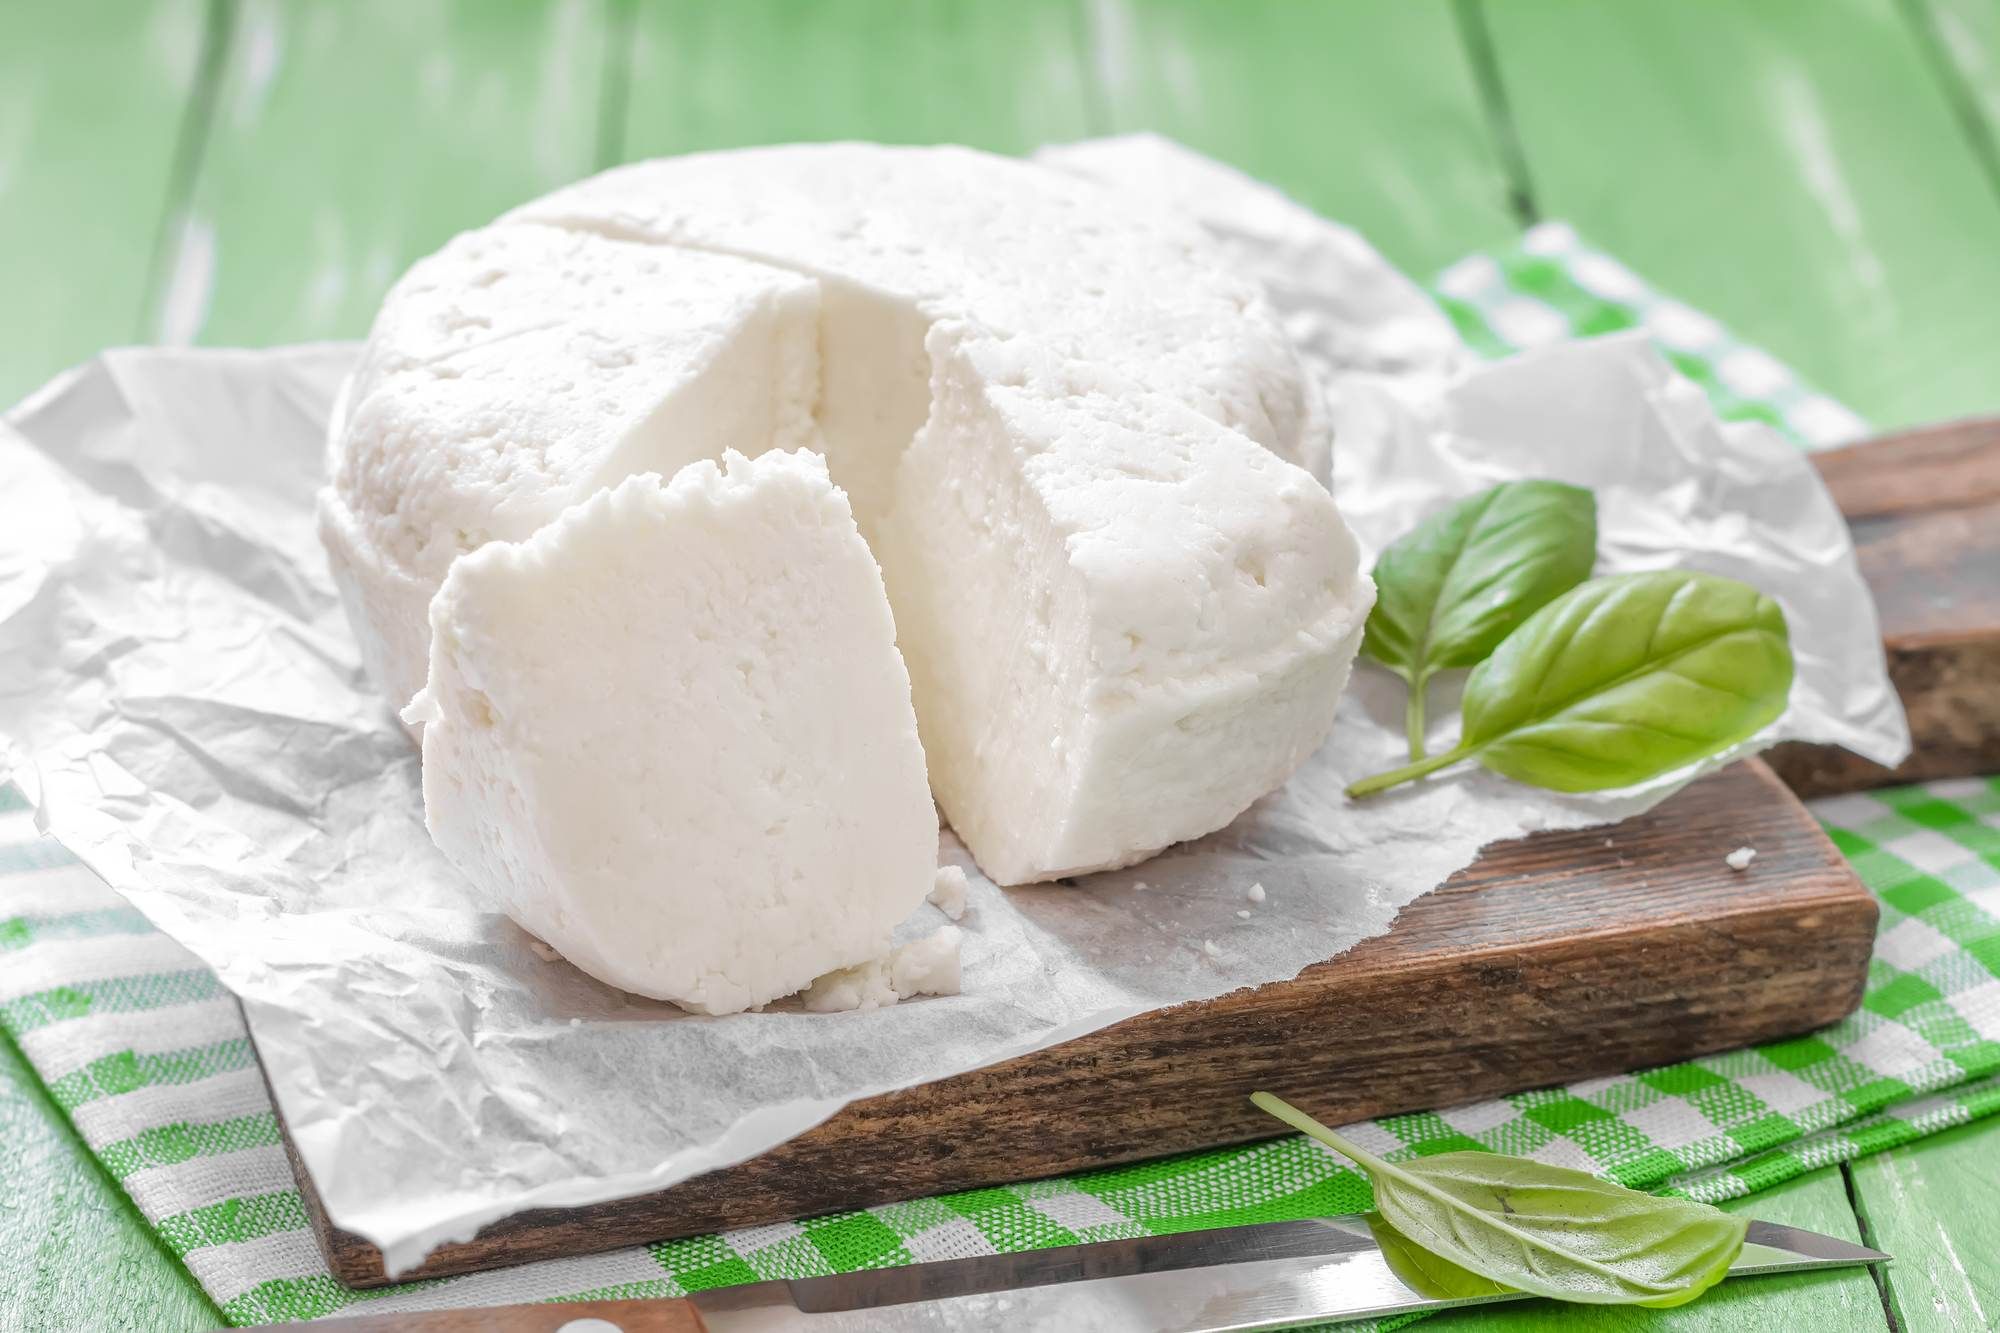 El Abuelito Cheese Queso Fresco cheese has been recalled due to a listeria outbreak. 